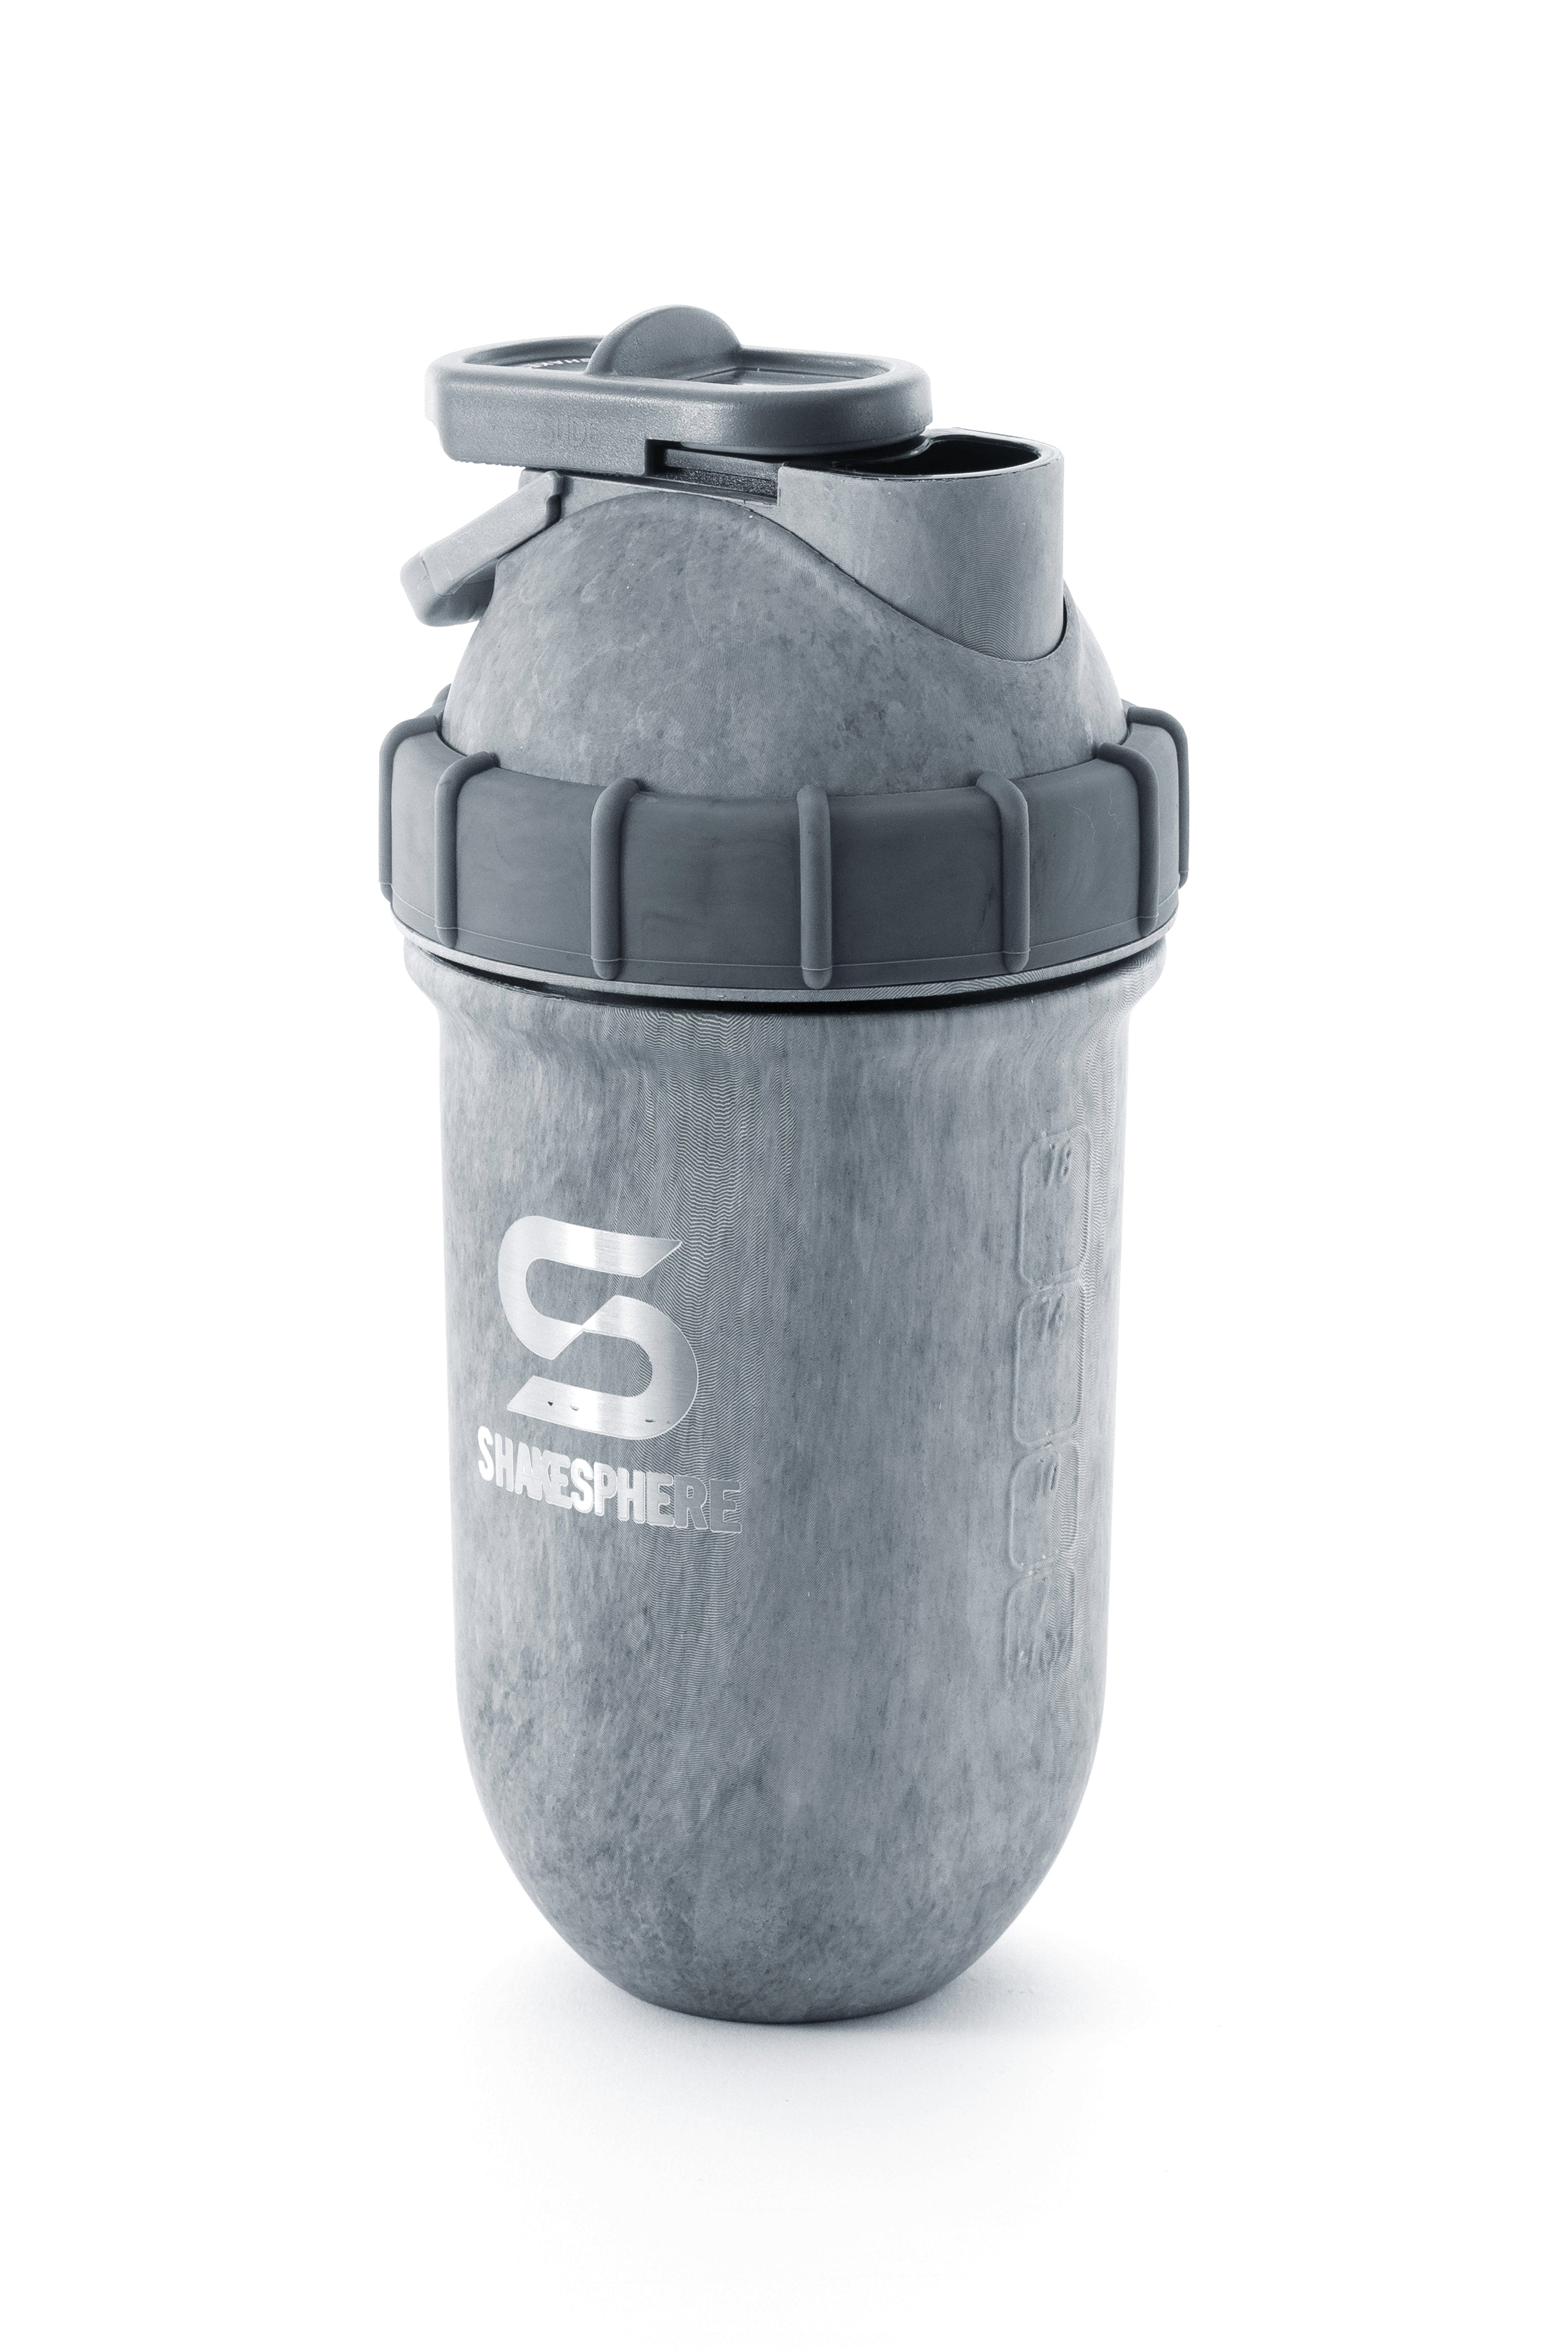 ShakeSphere Tumbler View: Protein Shaker Bottle with Side Window